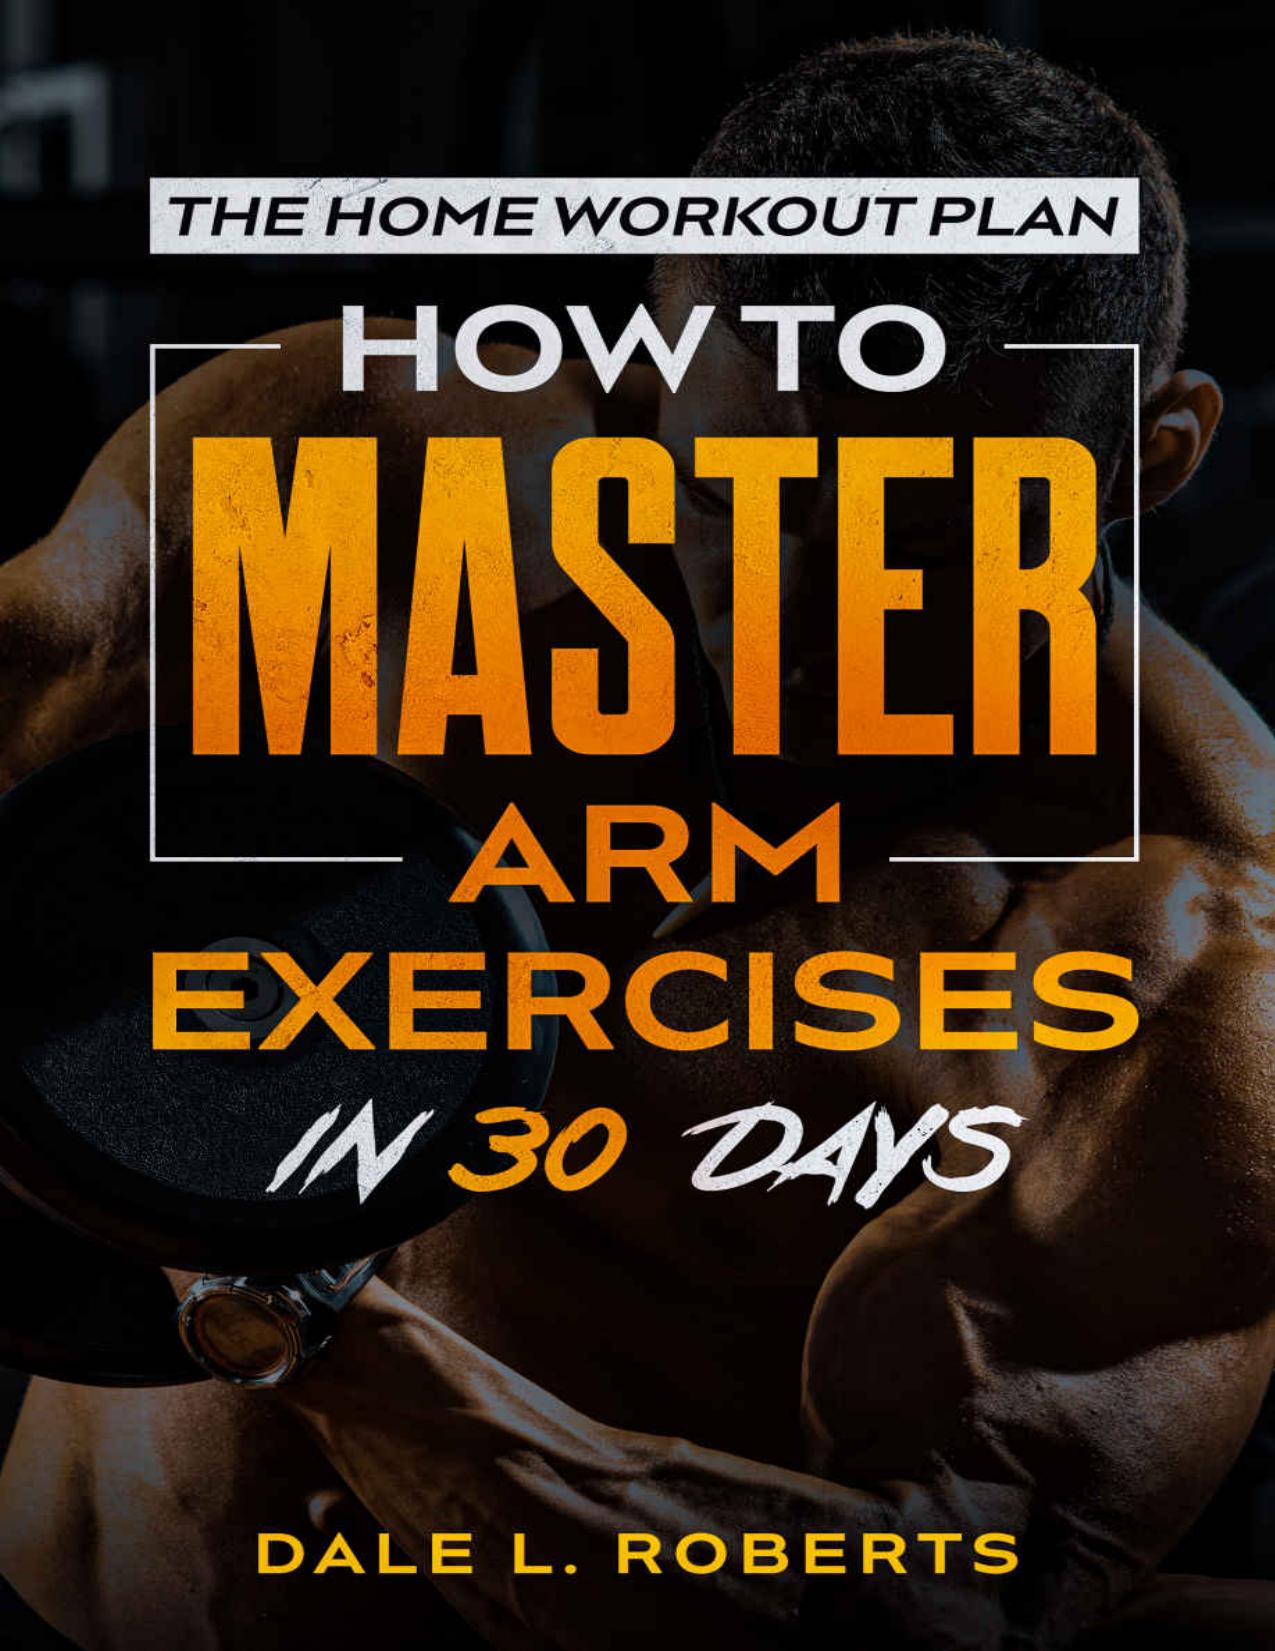 The Home Workout Plan by Roberts Dale L